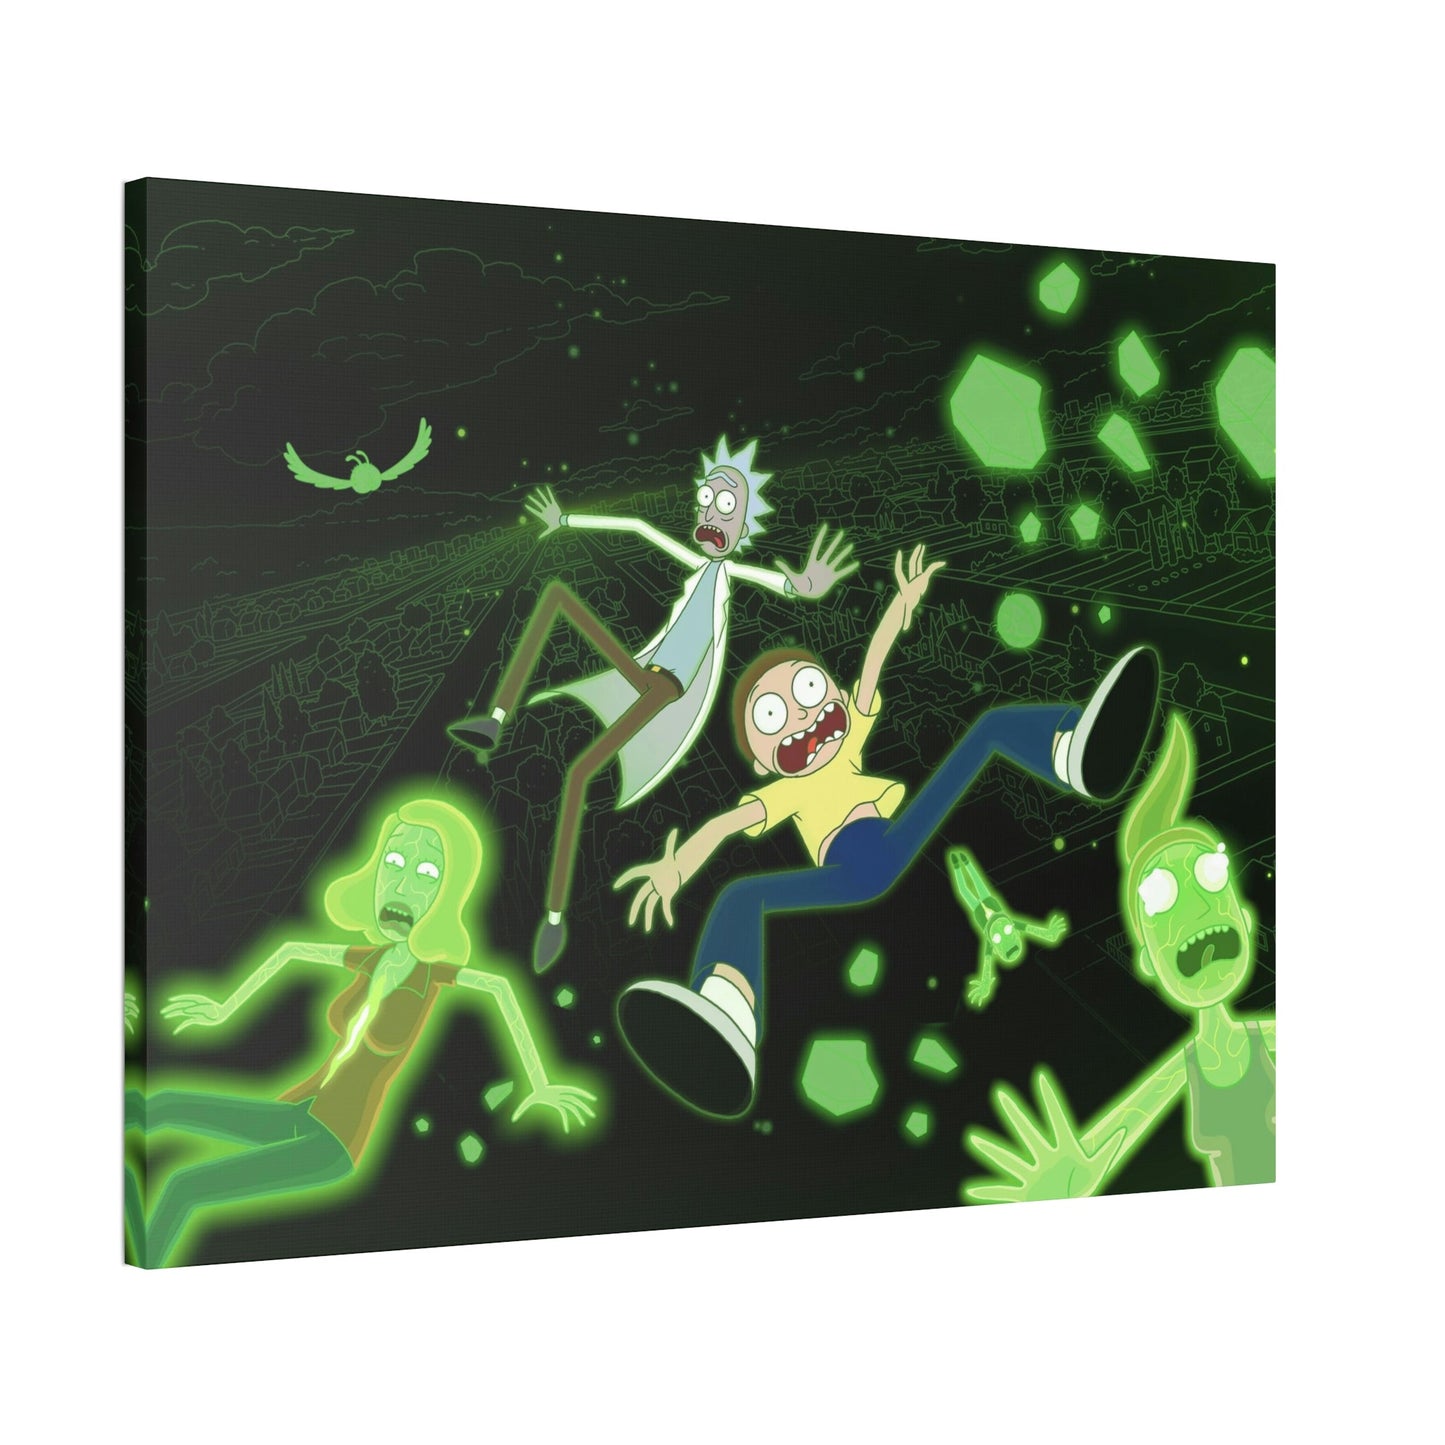 Interdimensional Adventure: Rick and Morty Art Print on Canvas for Wall Art Enthusiasts